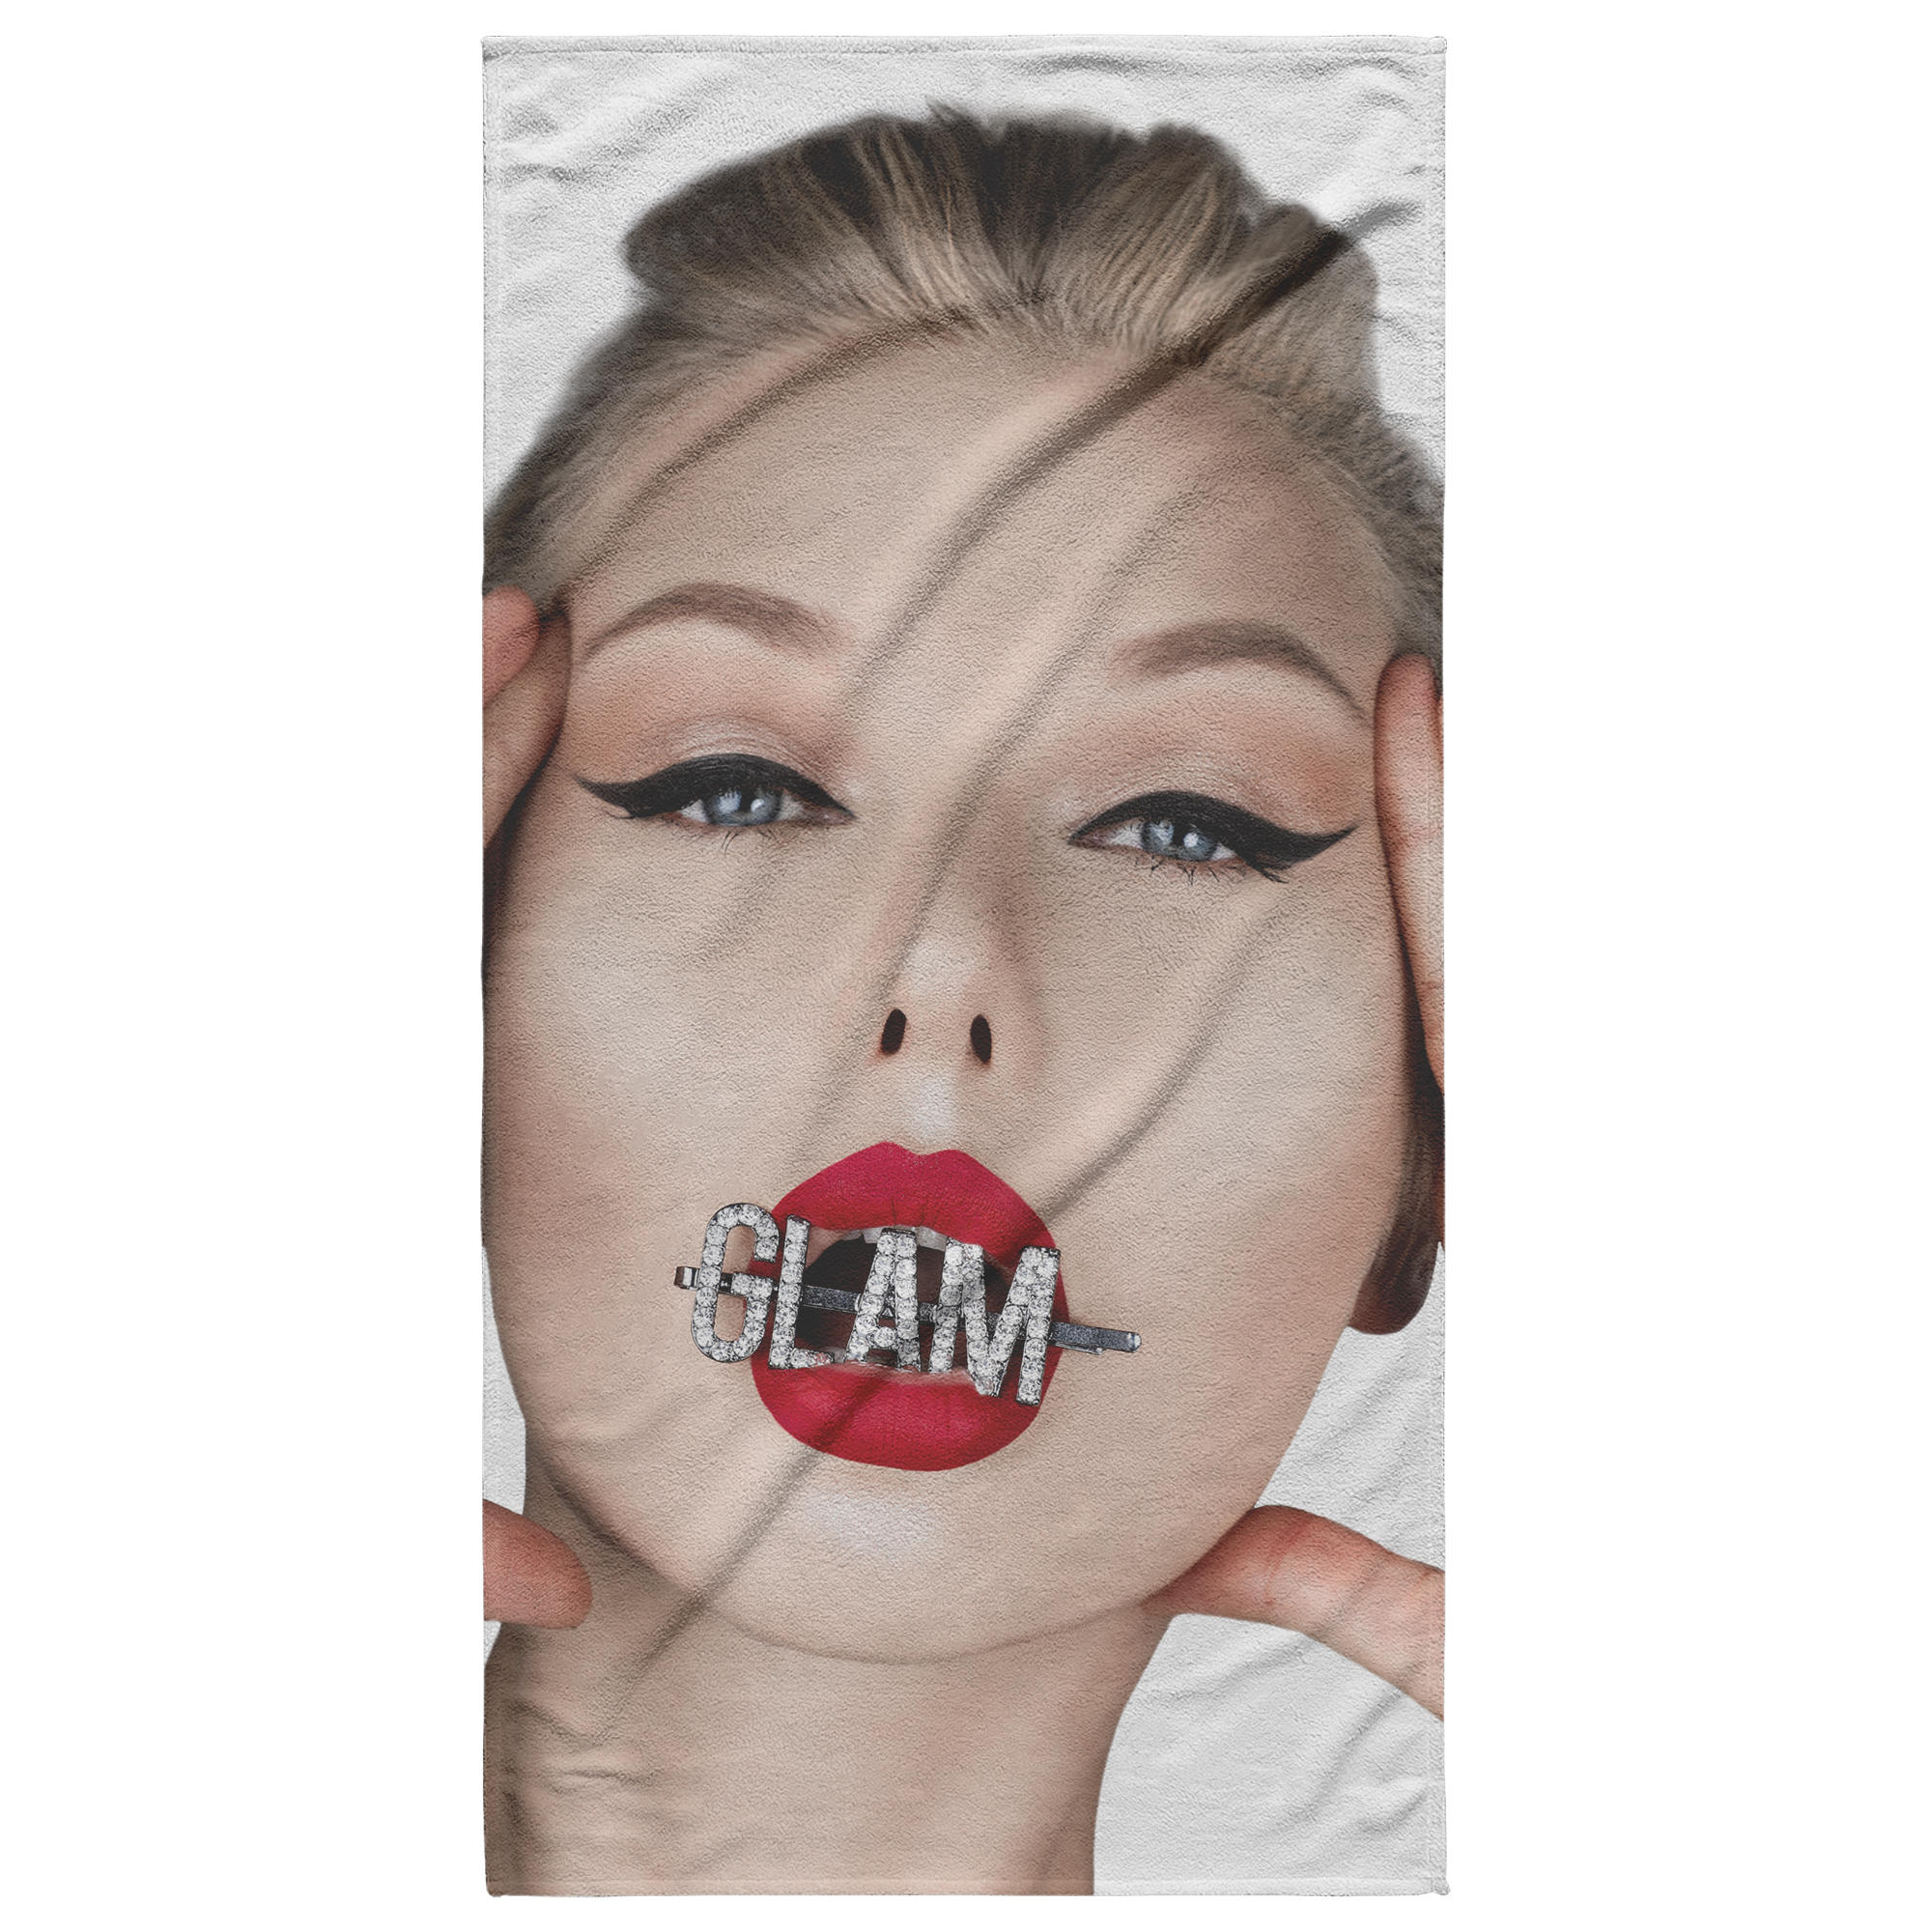 GLAM Beach Towel with Natalia - GET YOUR IMAGE ON A TOWEL